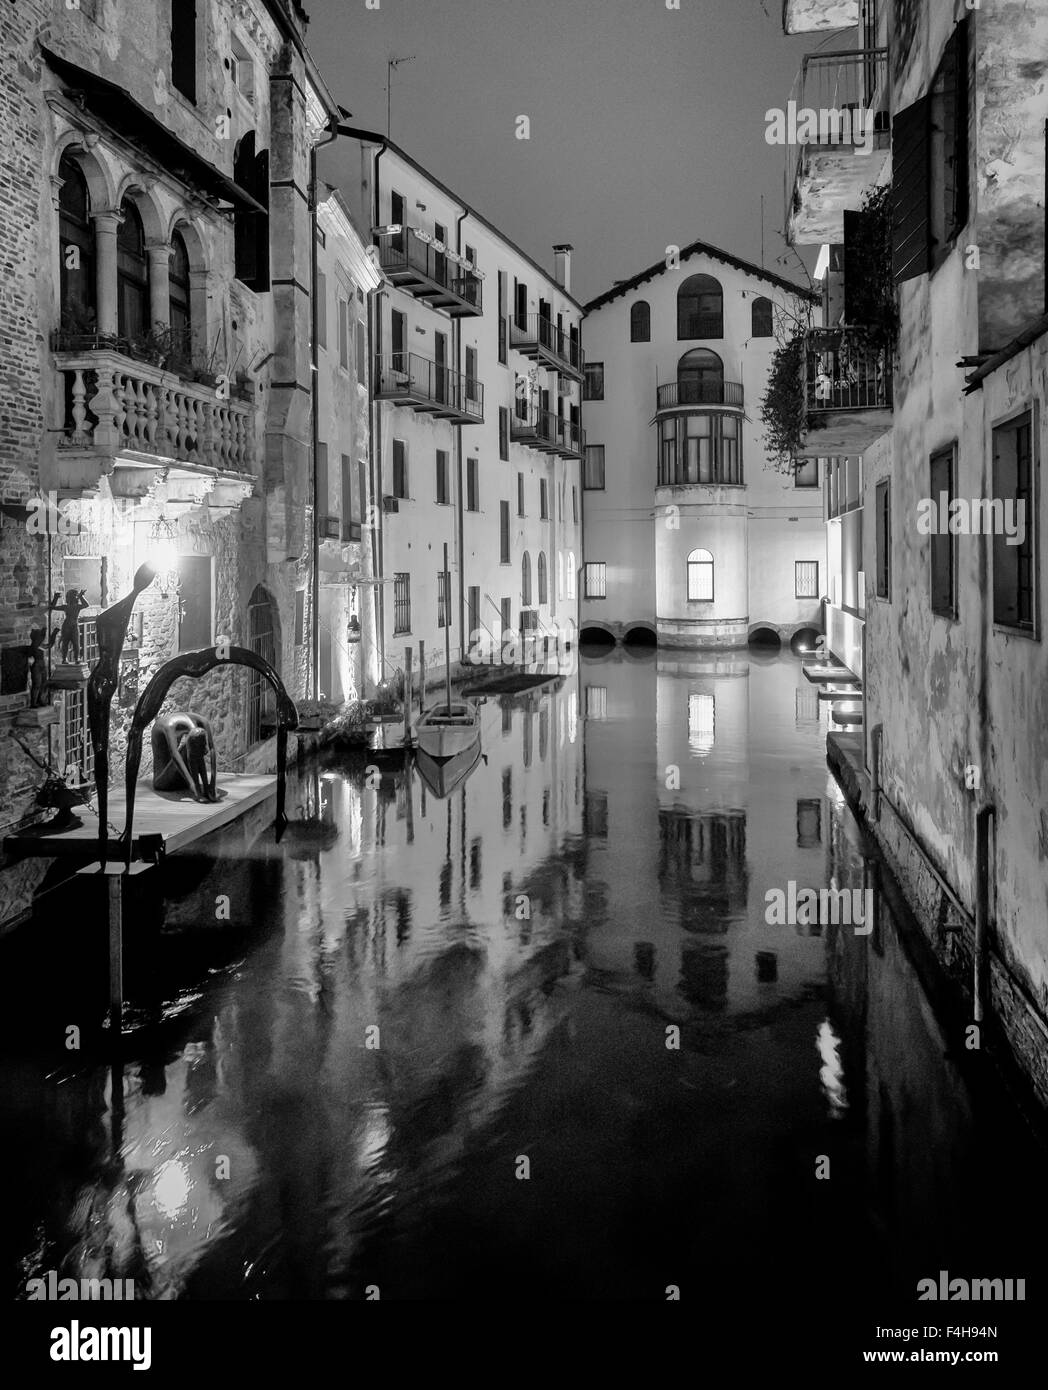 Night view of Treviso canal with surrounding buildings, typical italian architecture, vertical frame, b&w conversion Stock Photo